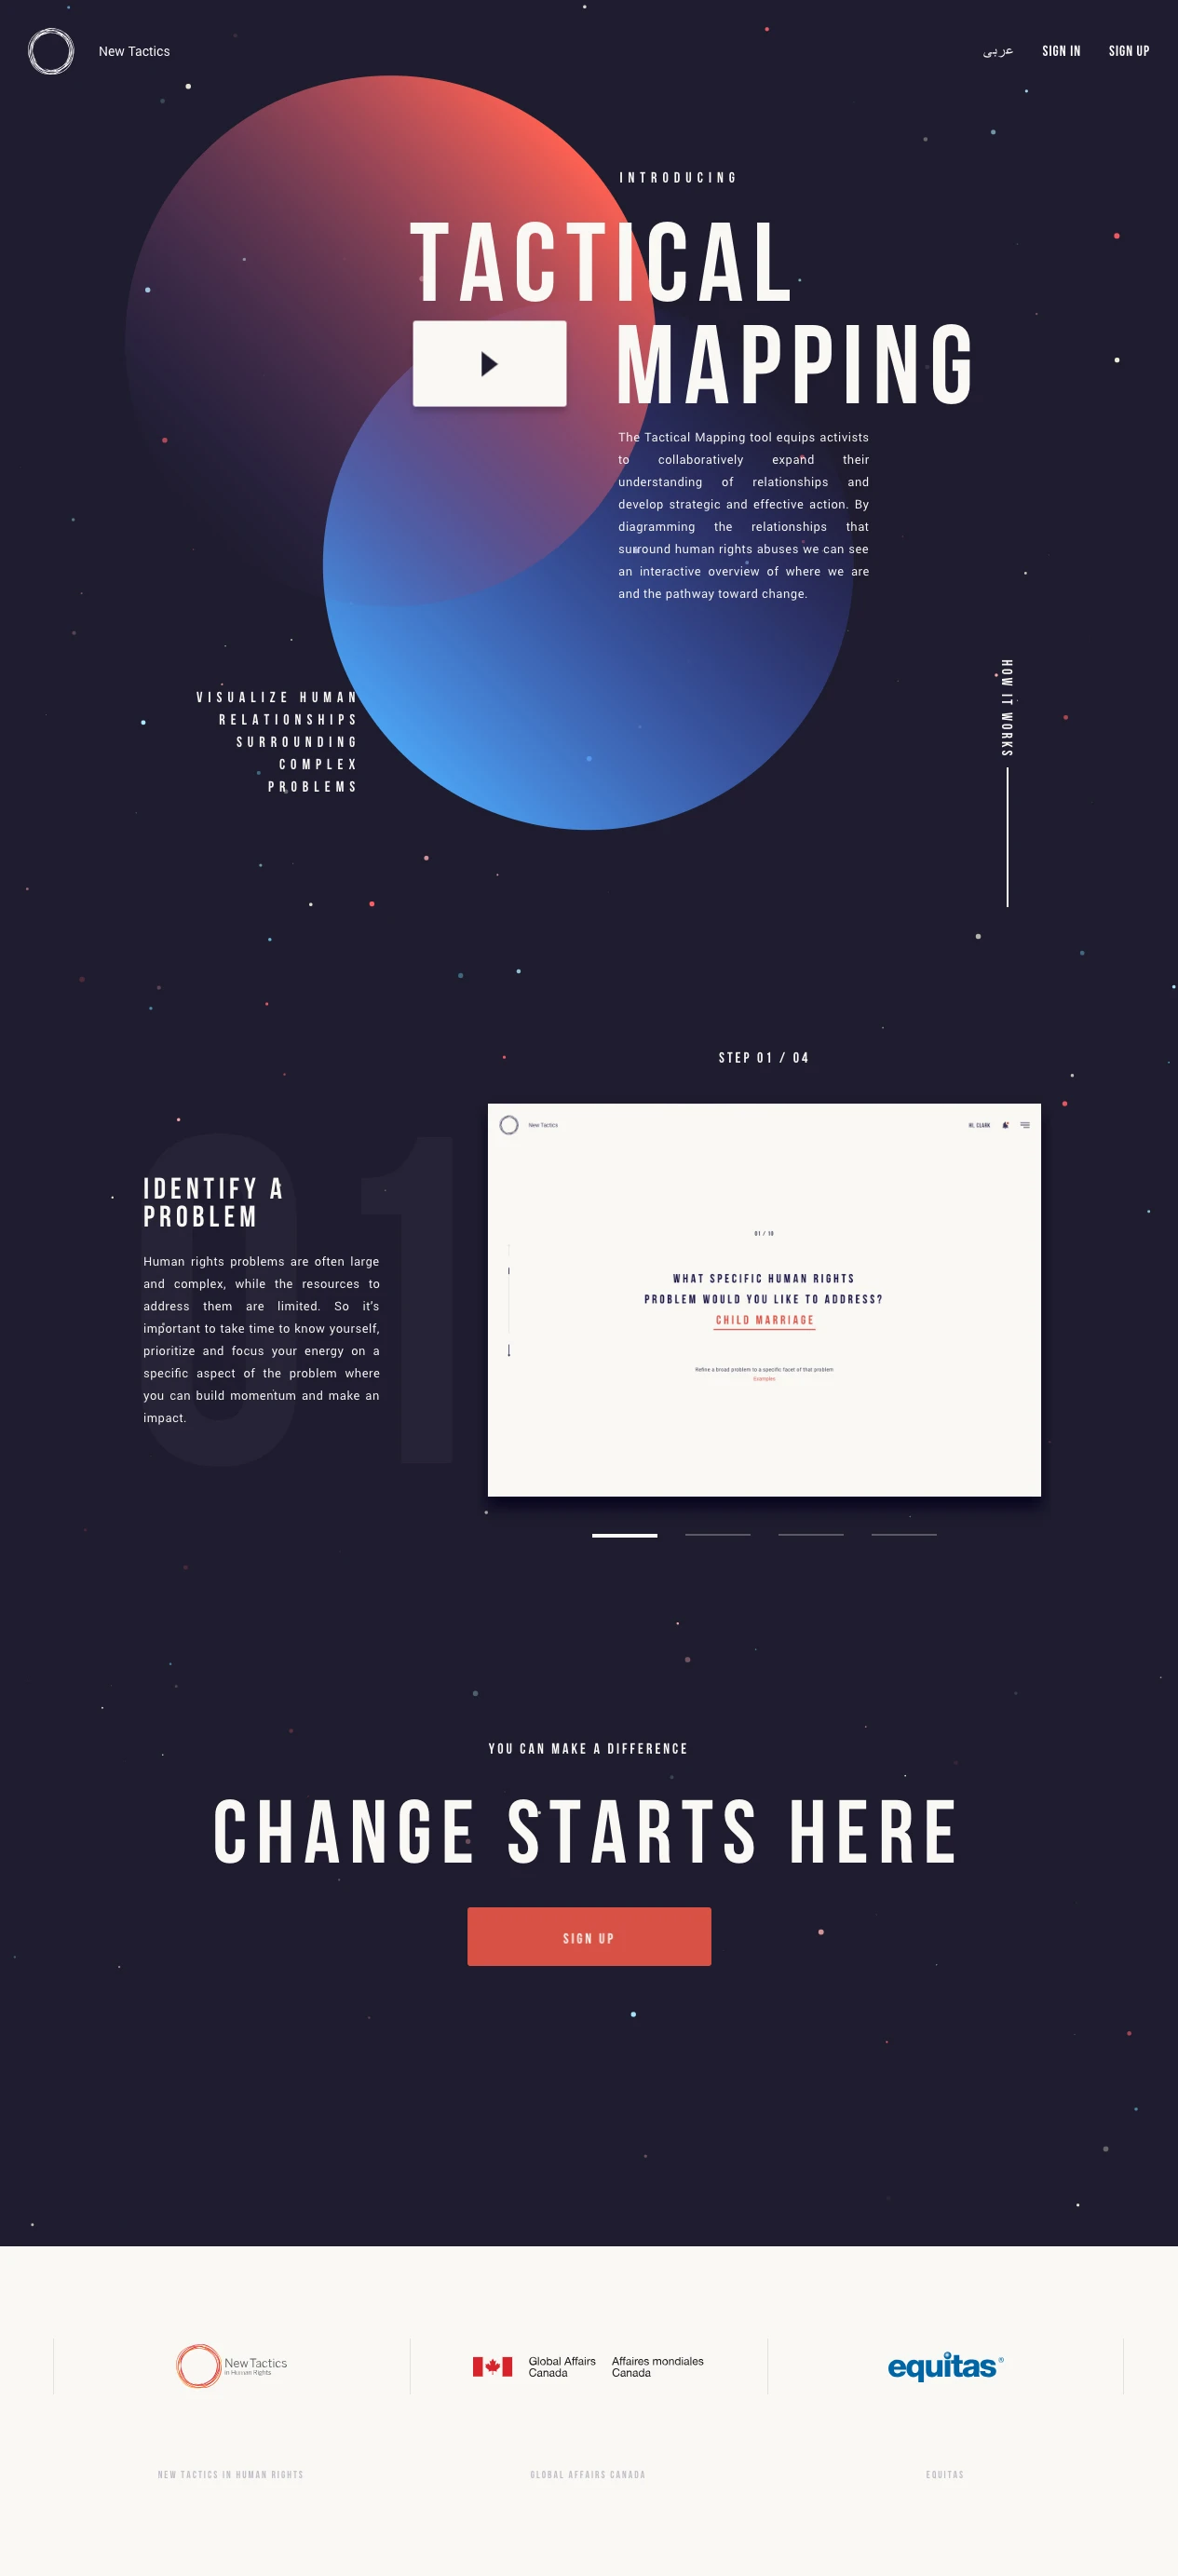 New Tactics Landing Page Example: Inspiring and equipping activists to change the world. Informed and connected citizens are the key to lasting human rights improvements in their communities.